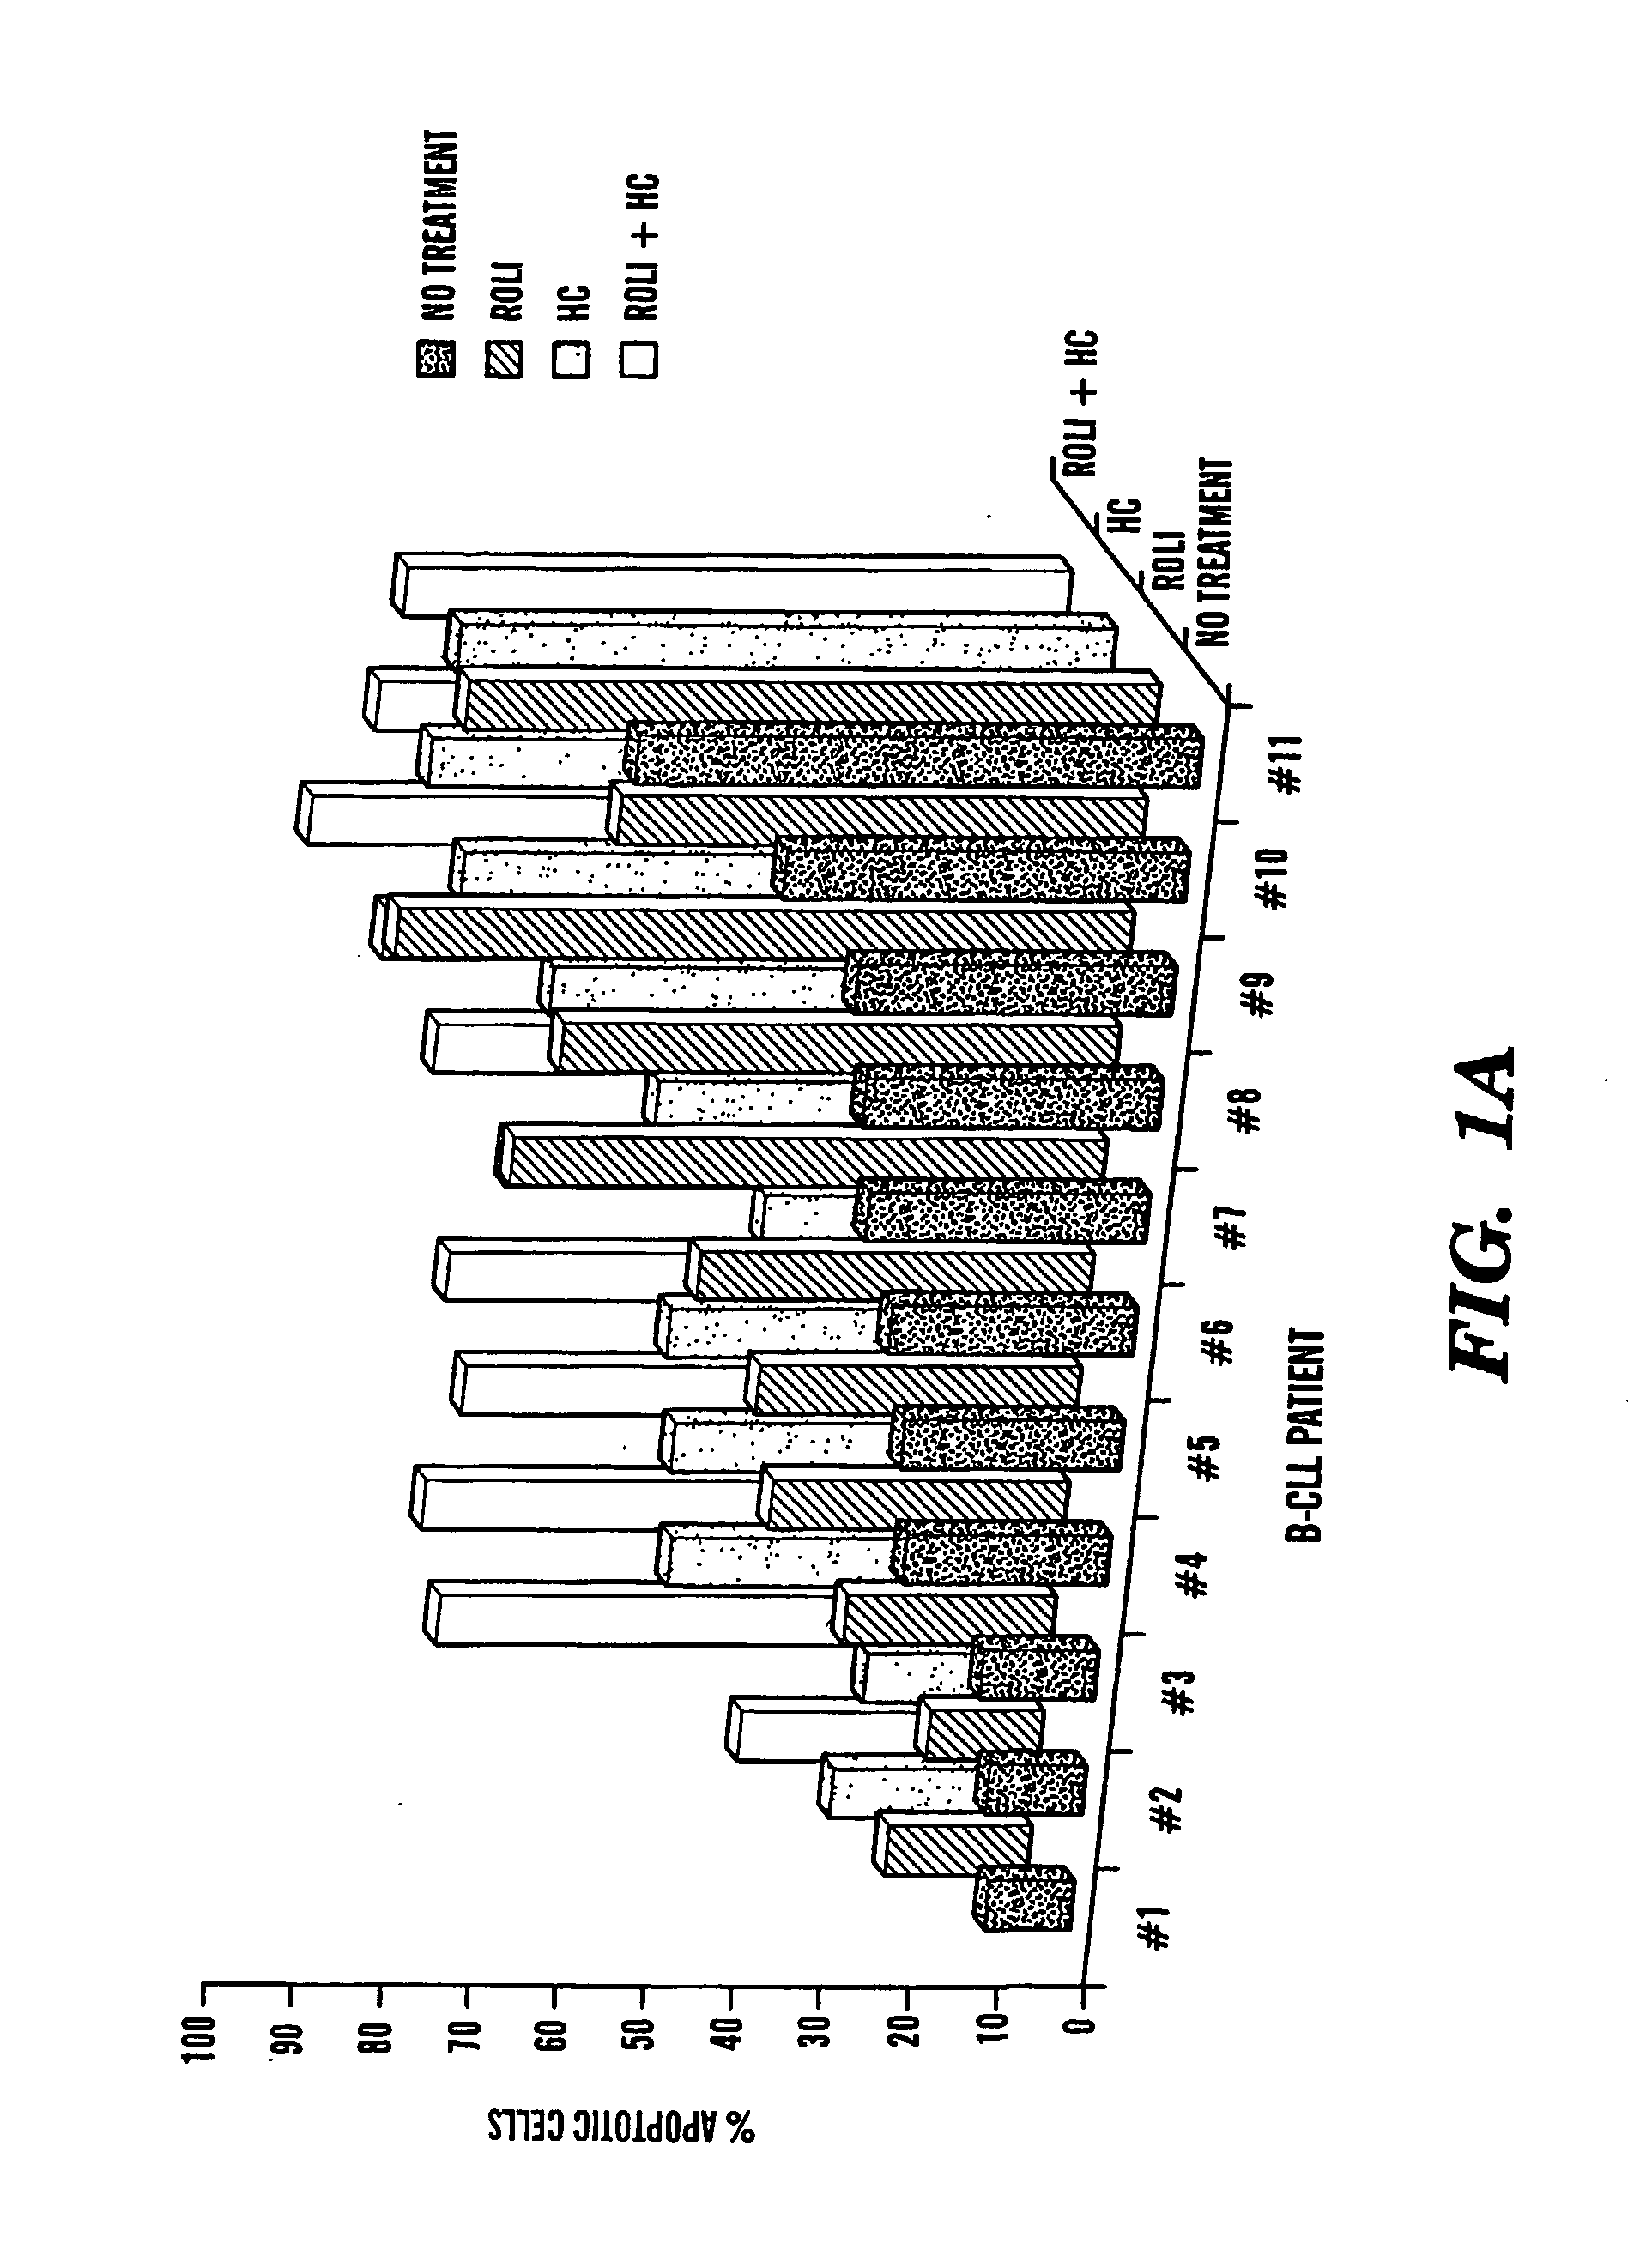 Compositions and Methods for the Treatment of Peripheral B-Cell Neoplasms